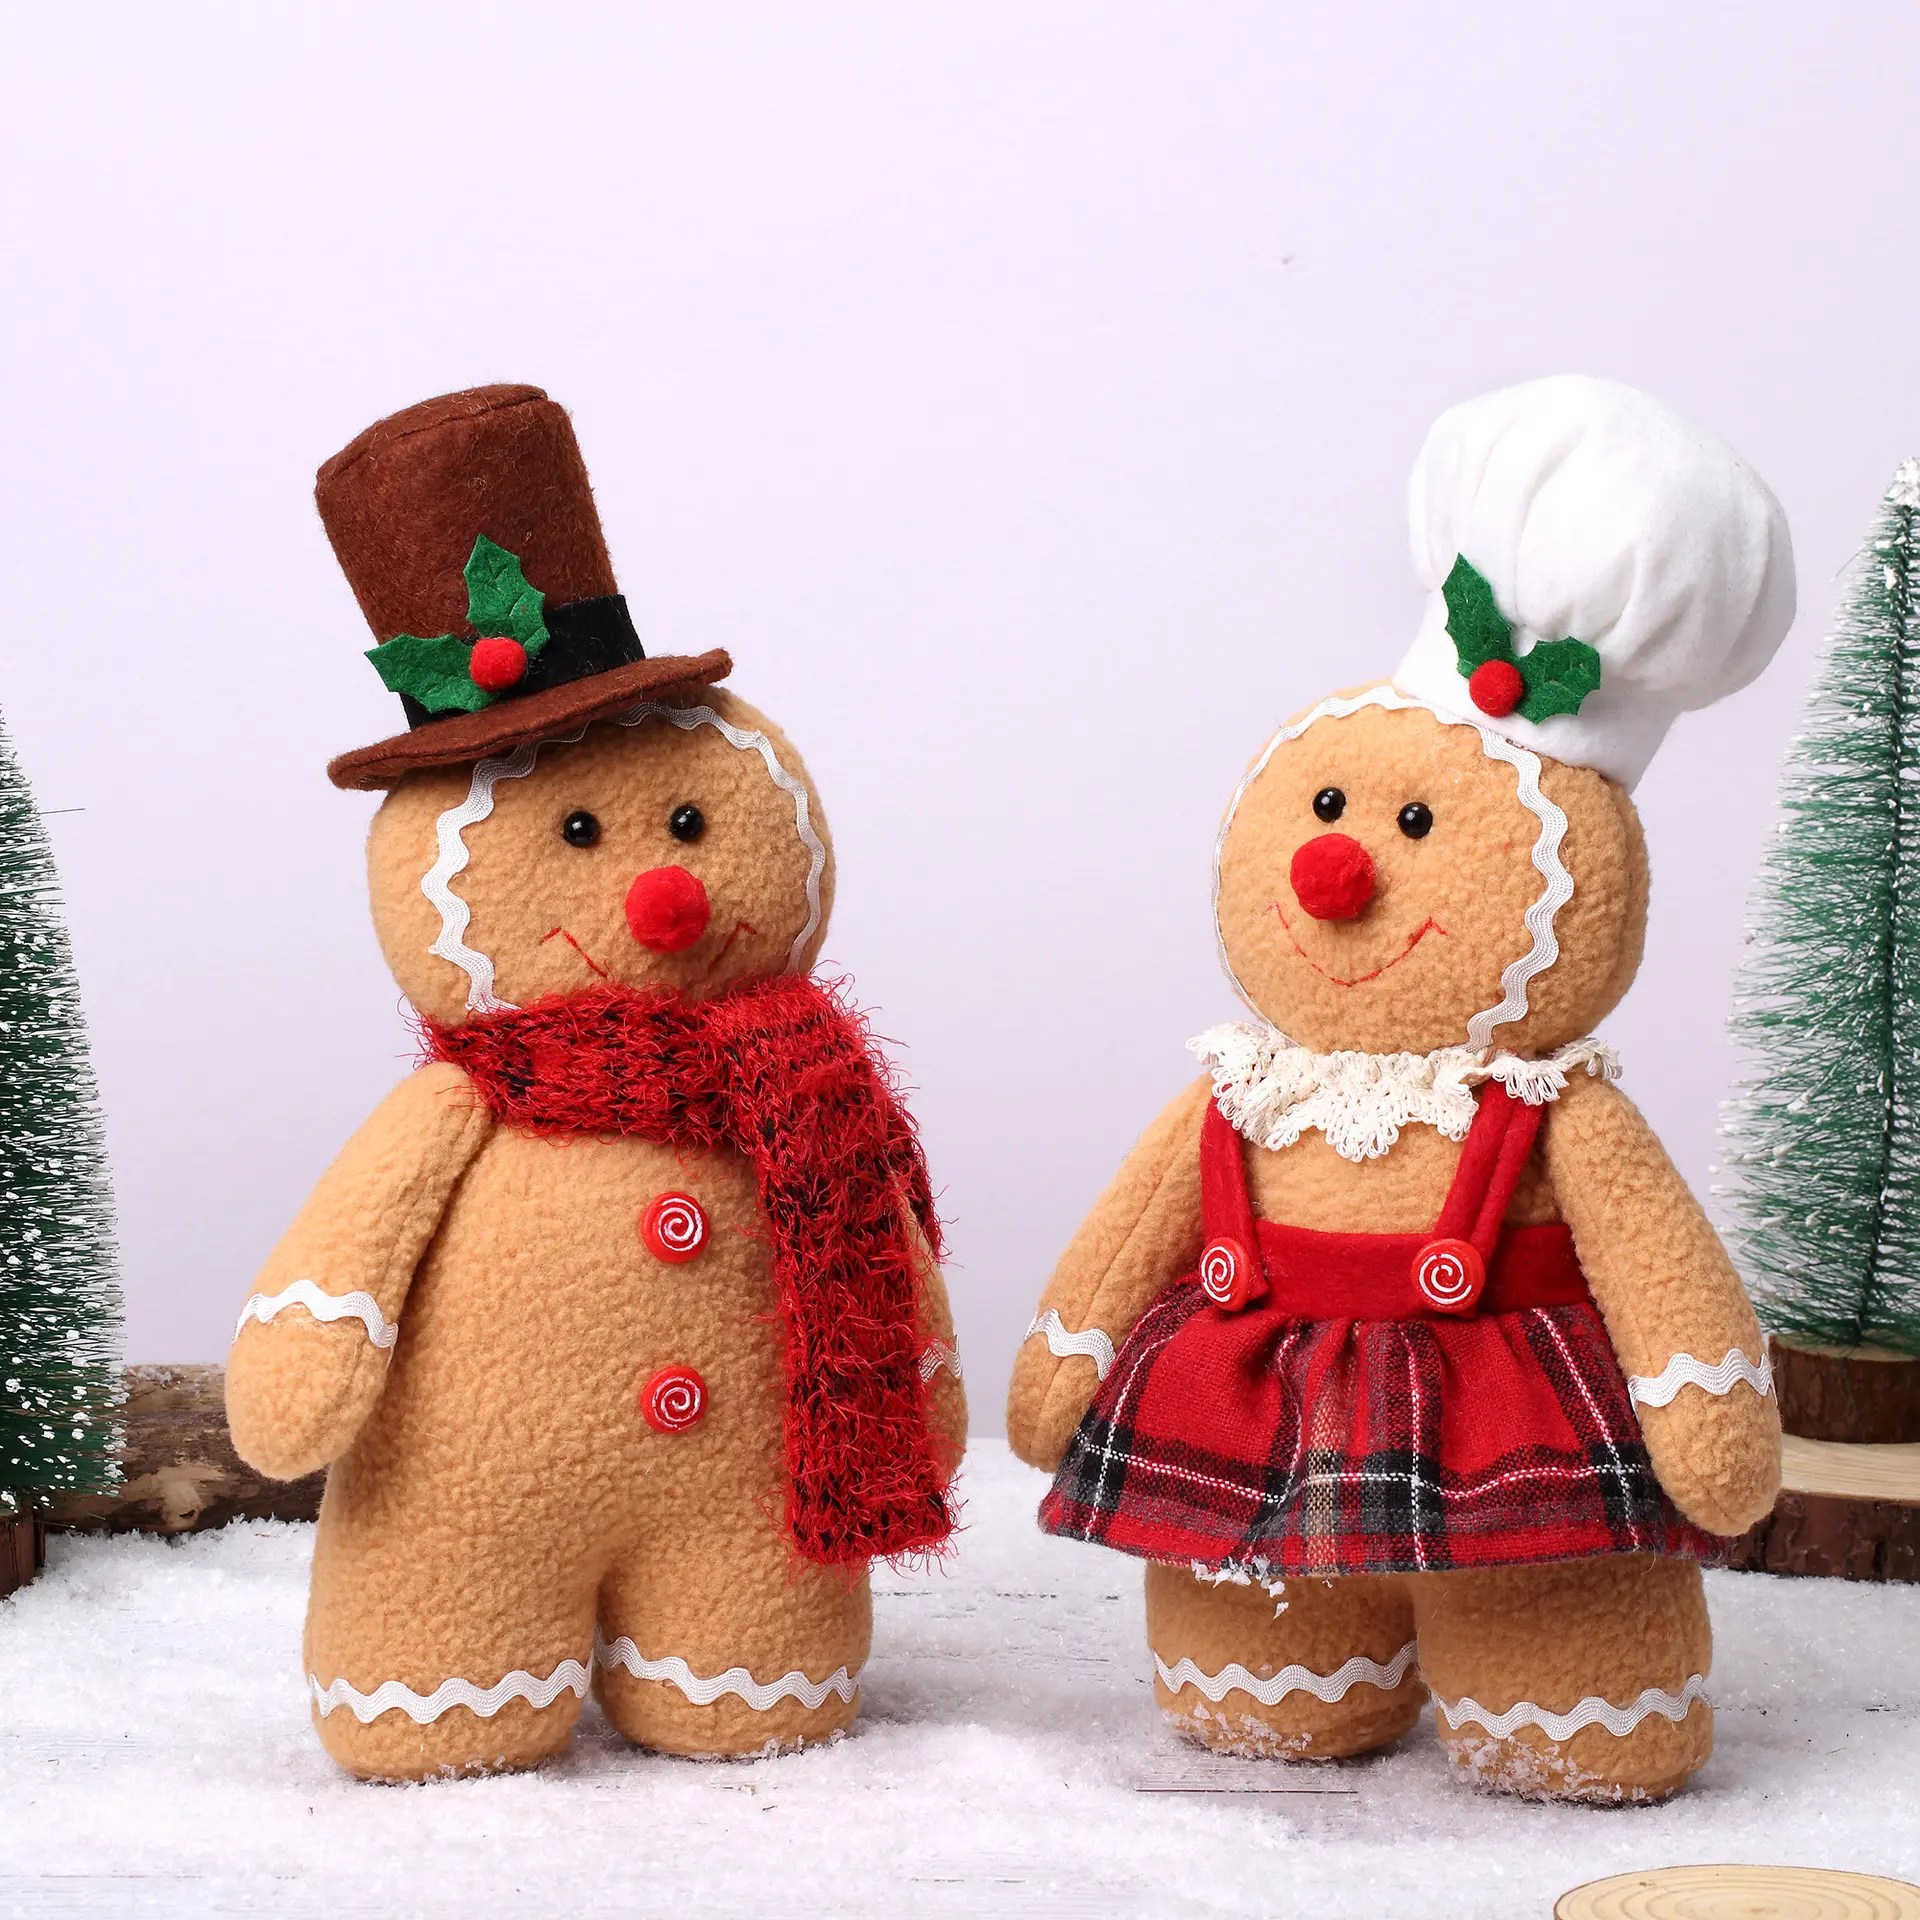 Christmas Decoration Gingerbread 30cm Size Wholesale Gingerbread Plush For Holiday Party Supplies Ornaments Home Decor